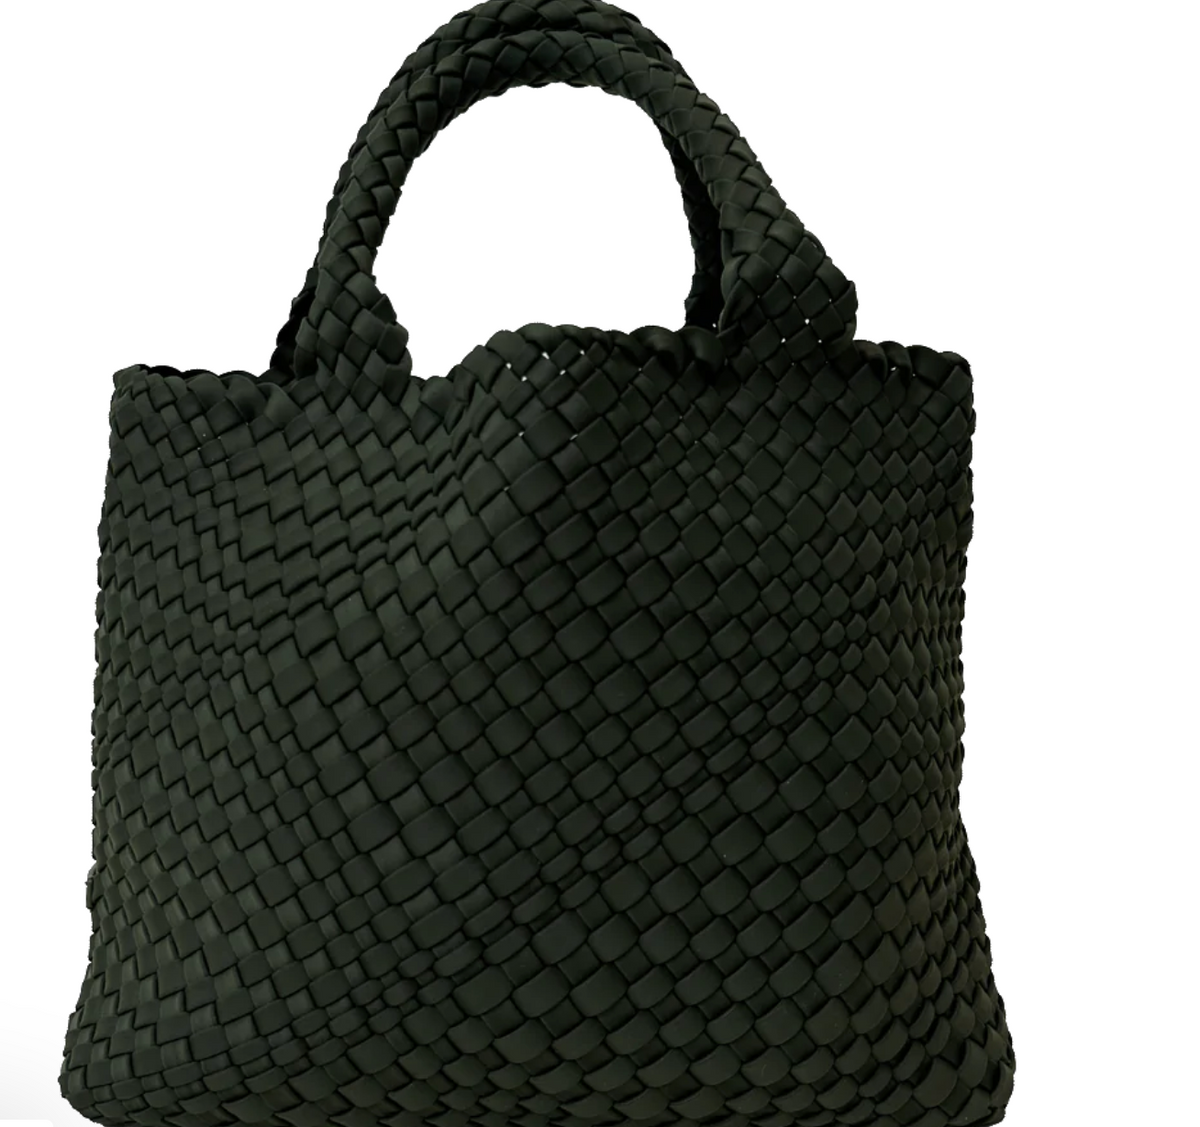 Woven Neoprene Tote with Pouch